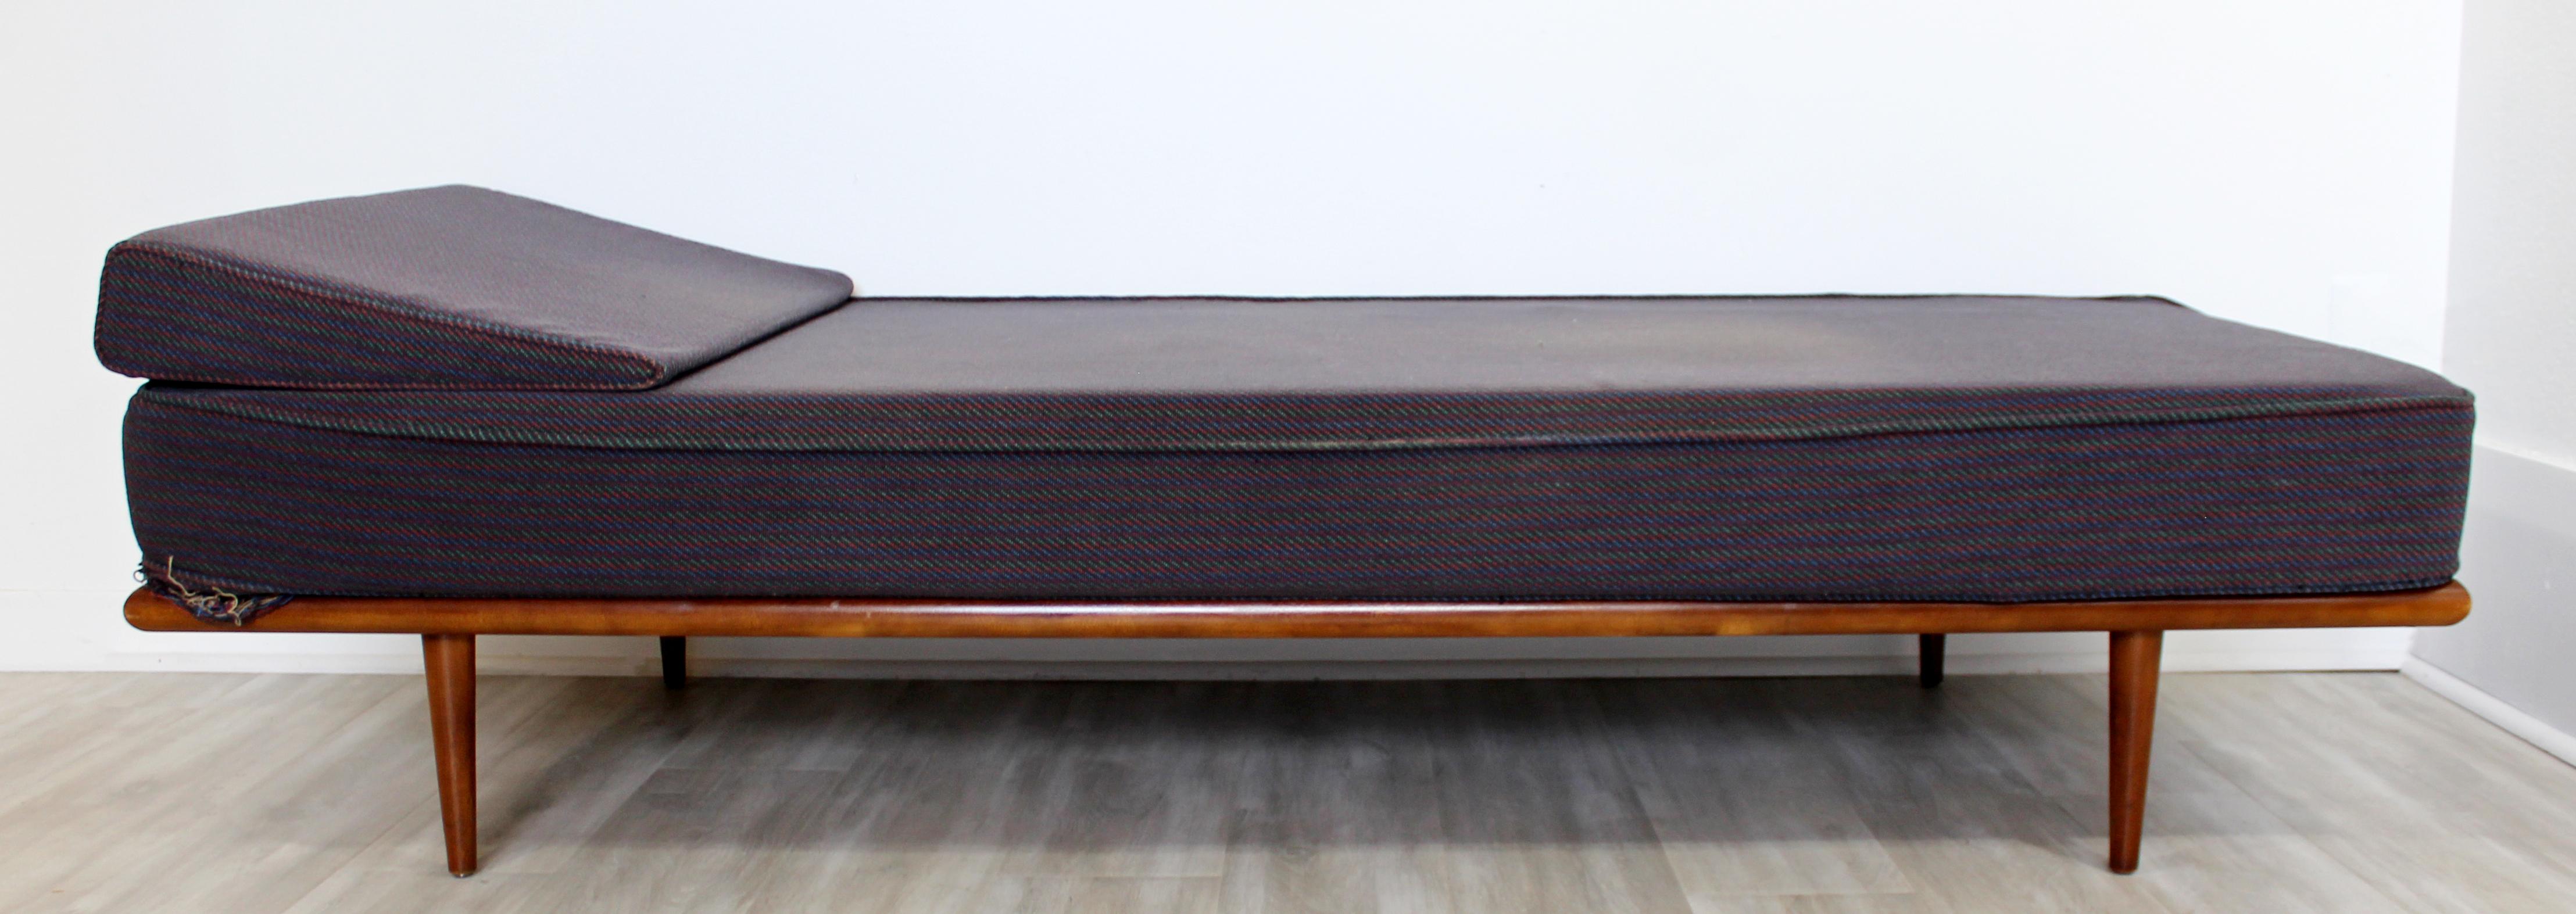 For your consideration is a rare and beautiful, walnut wood daybed or chaise, by George Nelson for Herman Miller, circa 1950s. In excellent vintage condition. Can be used as is, original upholstery, or would be killer in a brand new upholstery. The